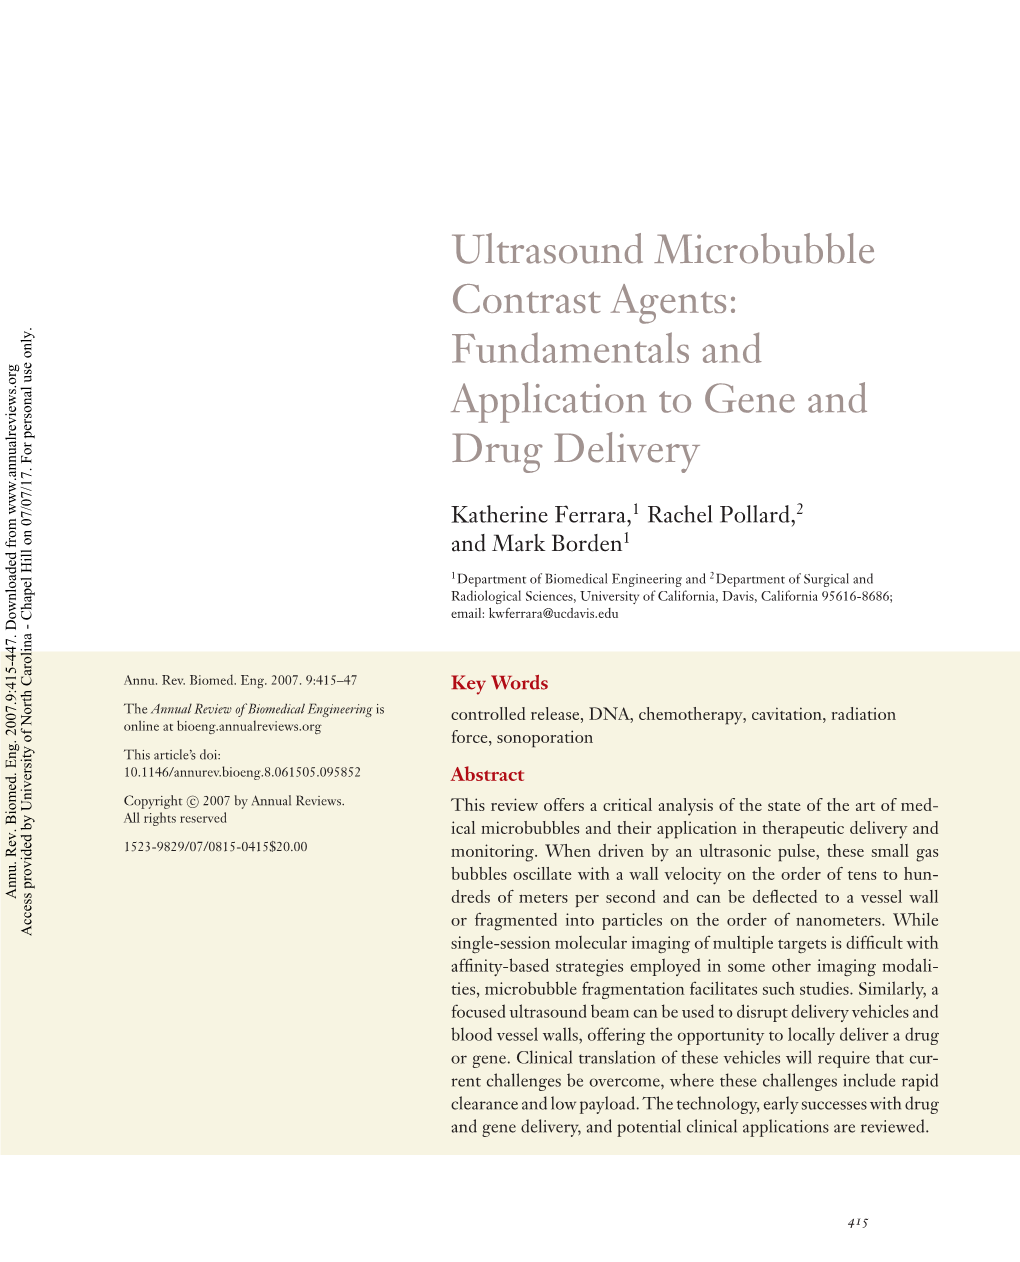 Ultrasound Microbubble Contrast Agents: Fundamentals and Application to Gene and Drug Delivery